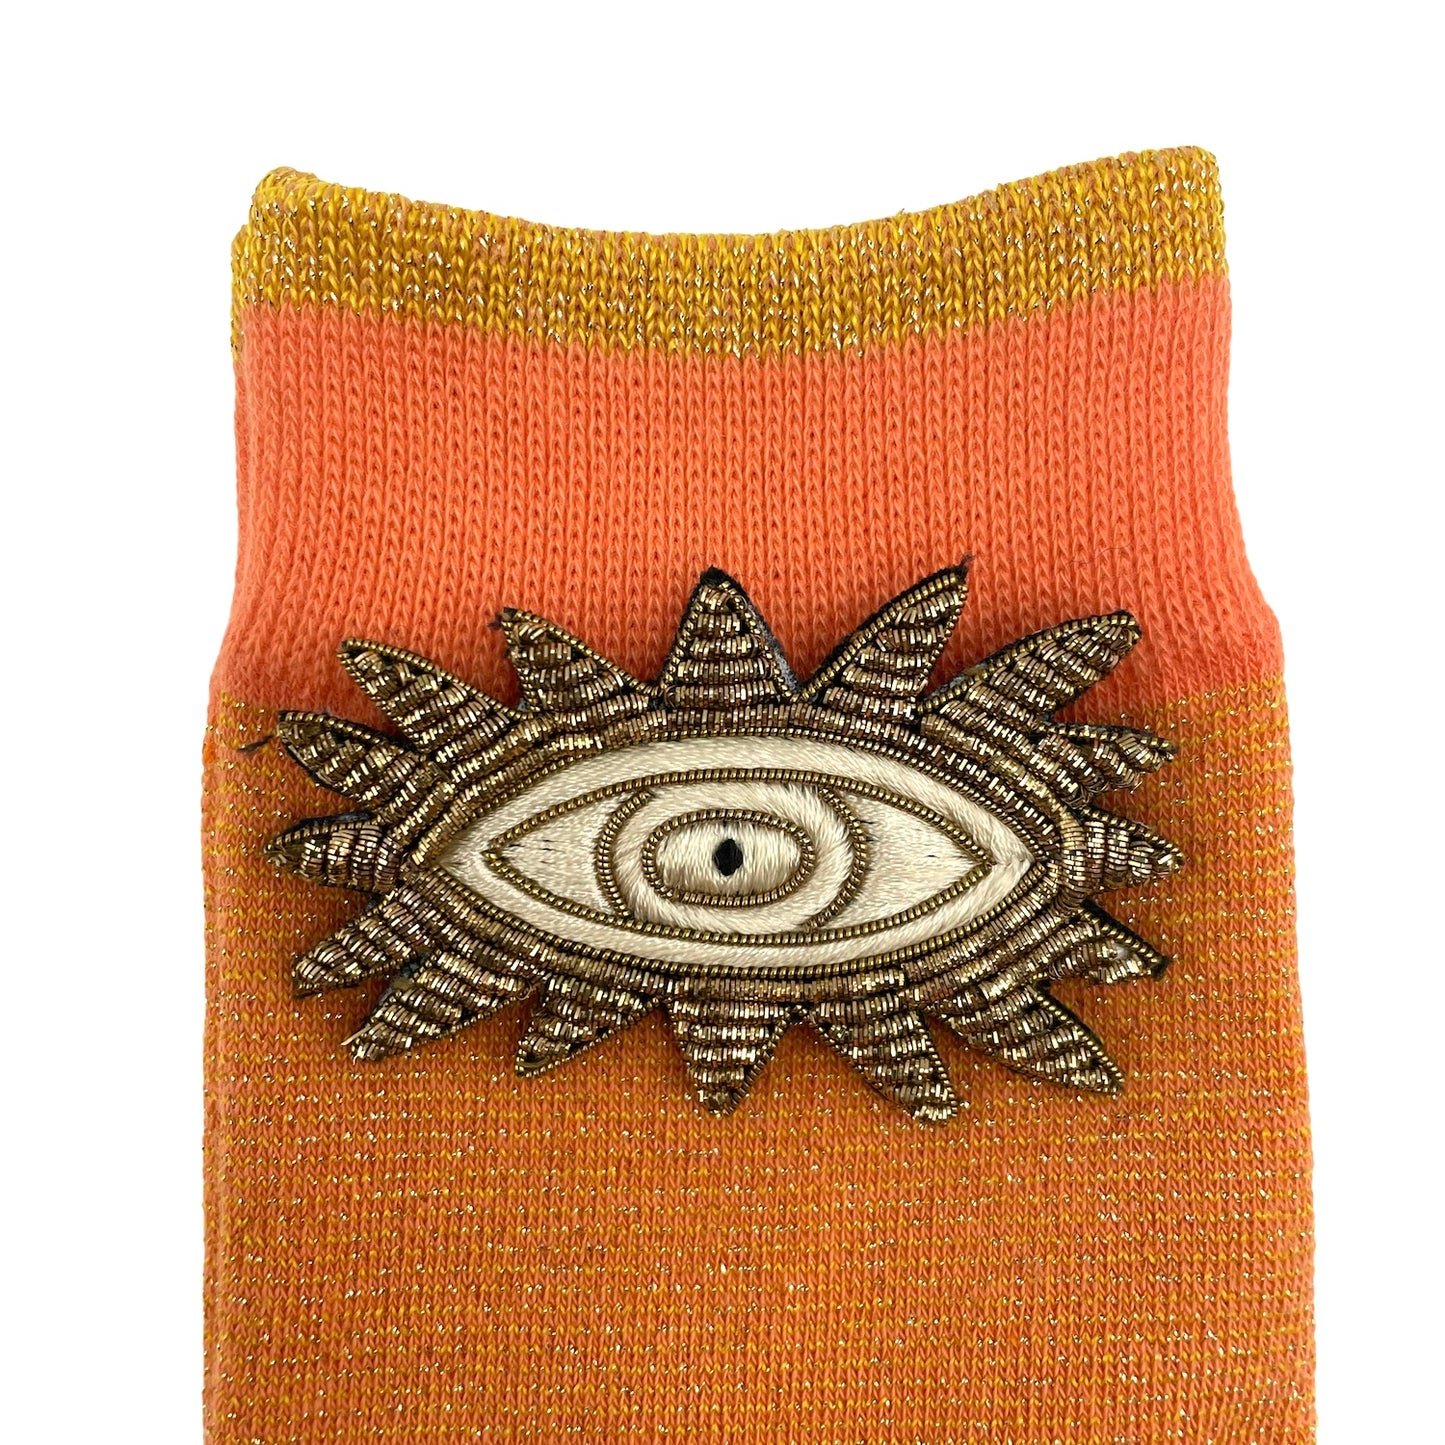 Tokyo socks in cantaloupe with a metallic eyes brooch